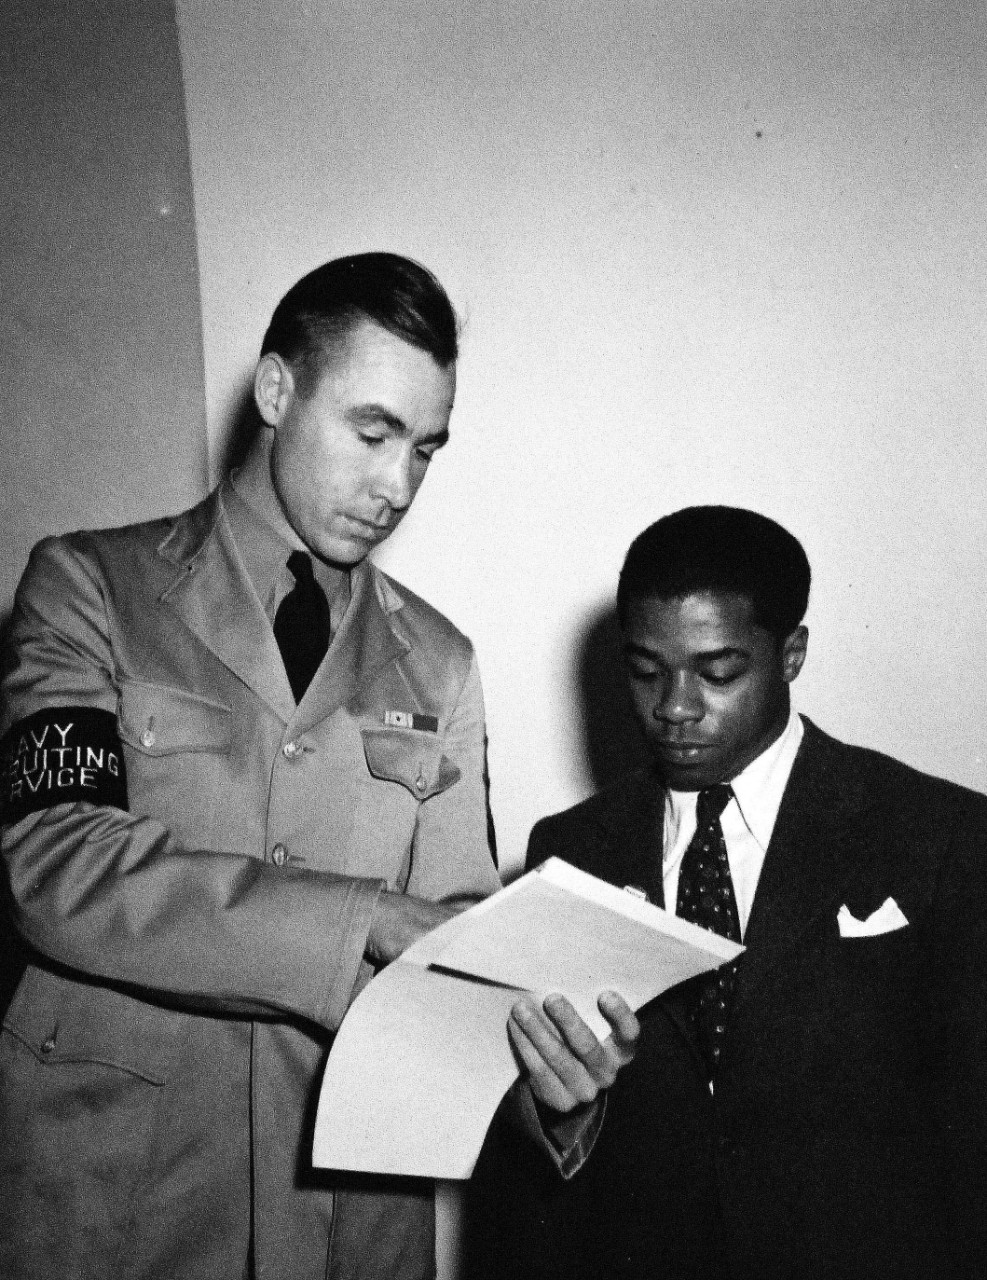 208-NP-8B-1:  William Baldwin, June 1942.    Baldwin was the first U.S. Navy African American recruit being assisted by a U.S. Navy Recruiting Service member, June 2, 1942.   Official U.S. Navy photograph, now in the collections of the National Archives.